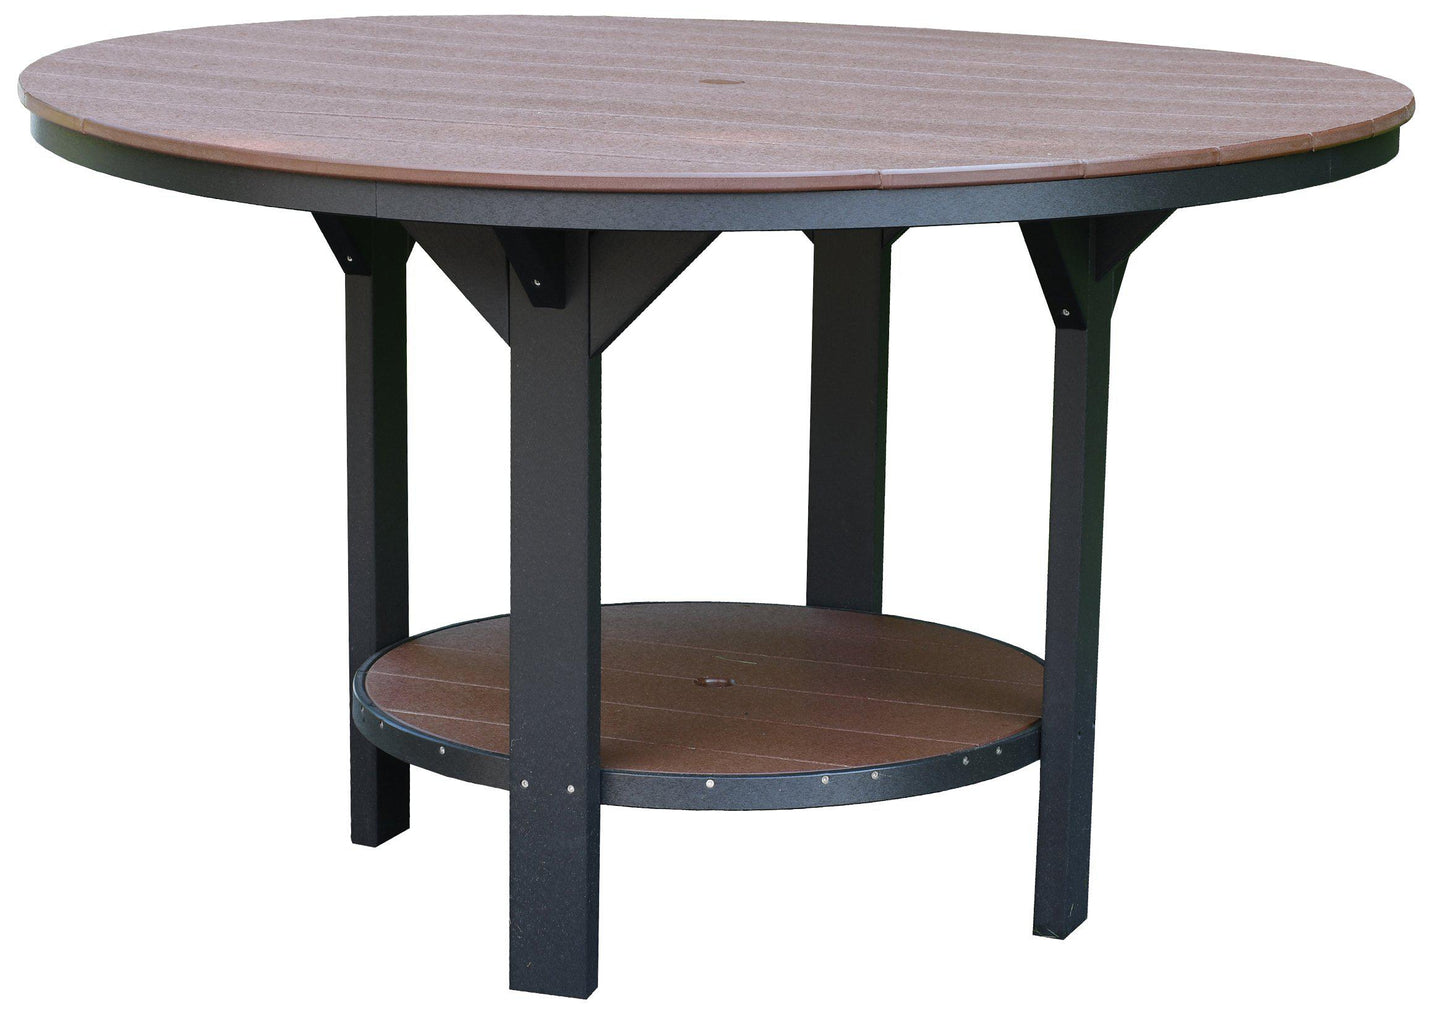 Wildridge Recycled Plastic Heritage Outdoor 60" Pub Table (COUNTER HEIGHT) - LEAD TIME TO SHIP 3 WEEKS